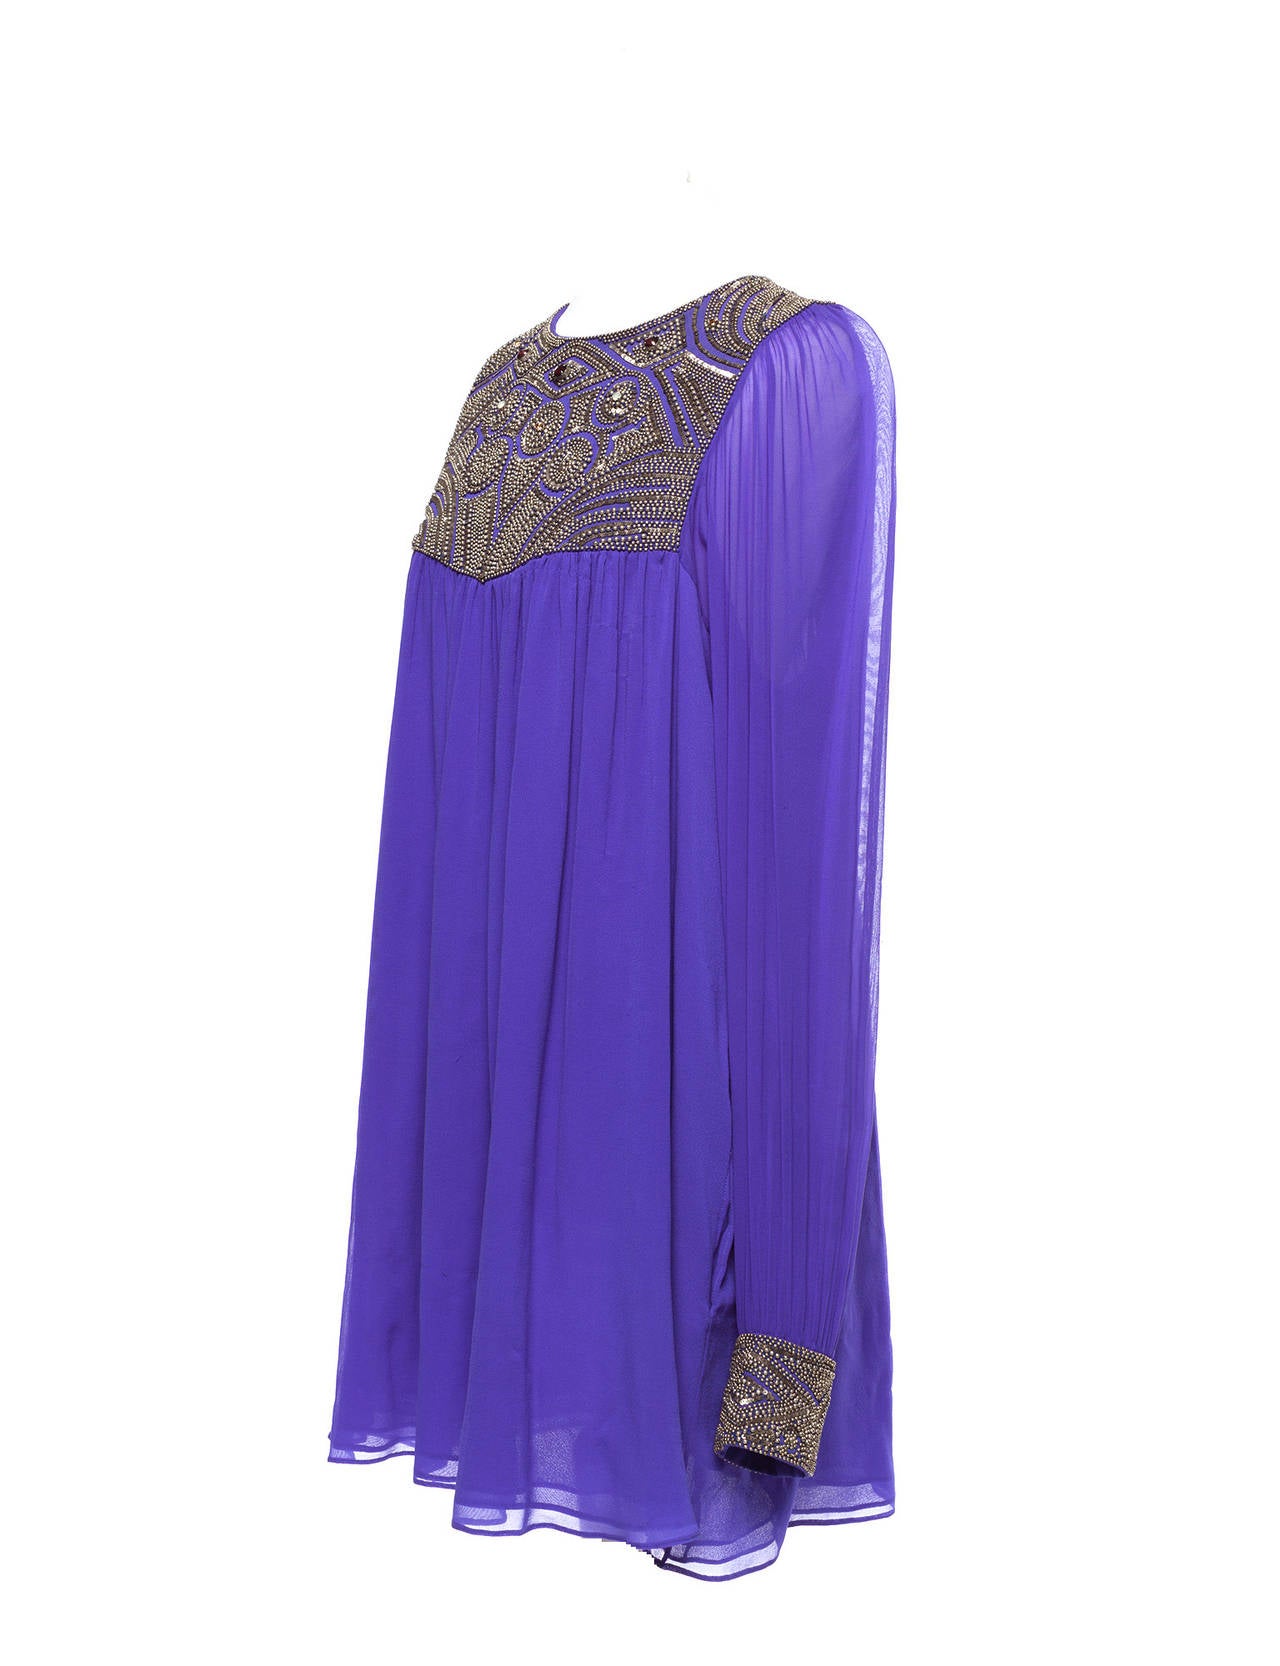 Tunic has a tunic feeling with romantic sleeves, beaded front bib, glass back button.